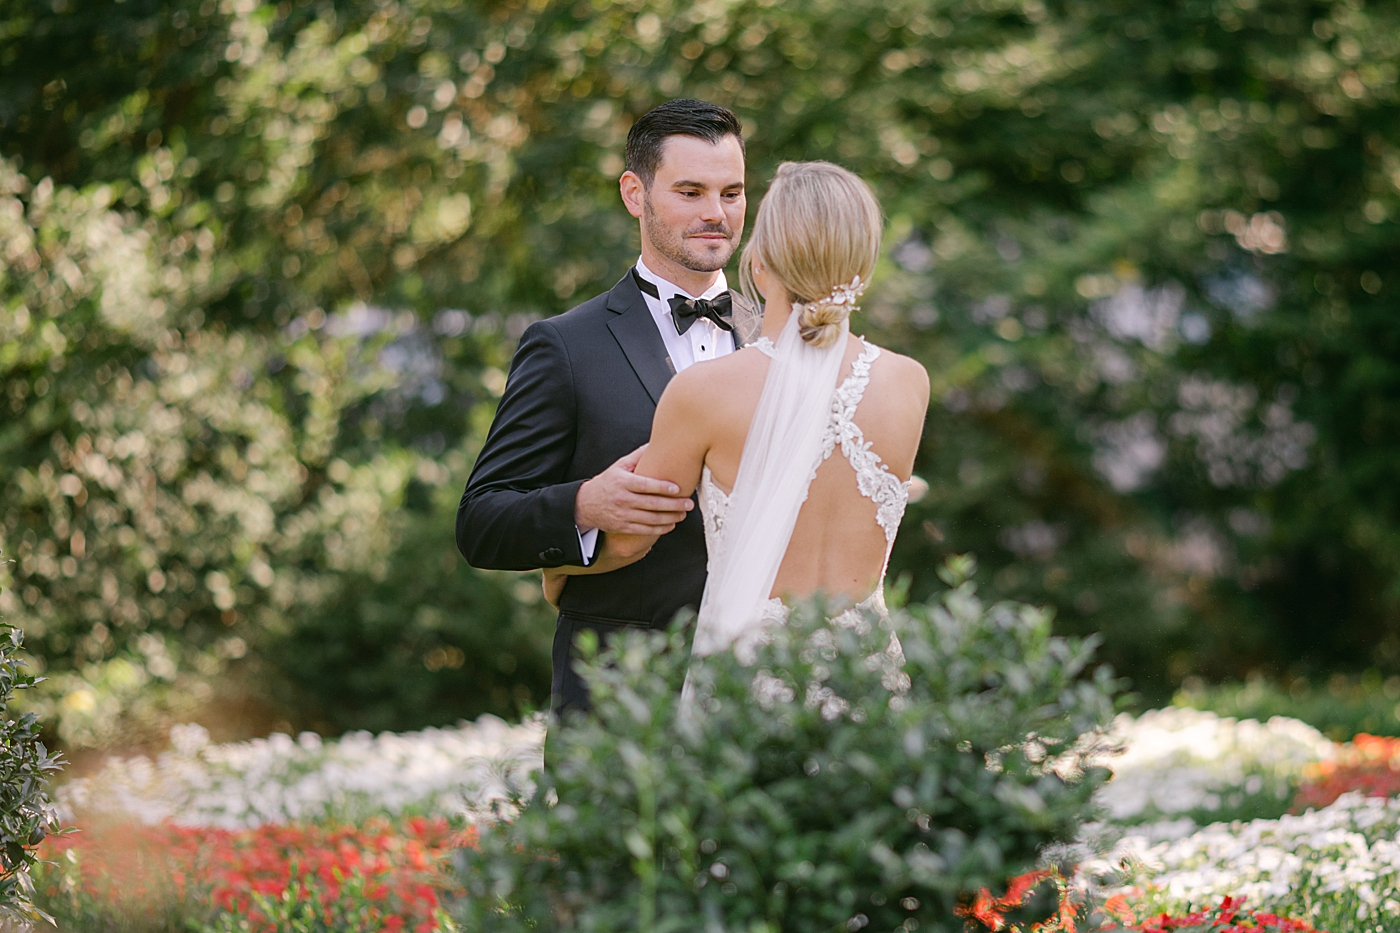 Bride and groom first look in a garden during Hotel du Village Wedding | Image by Hope Helmuth Photography